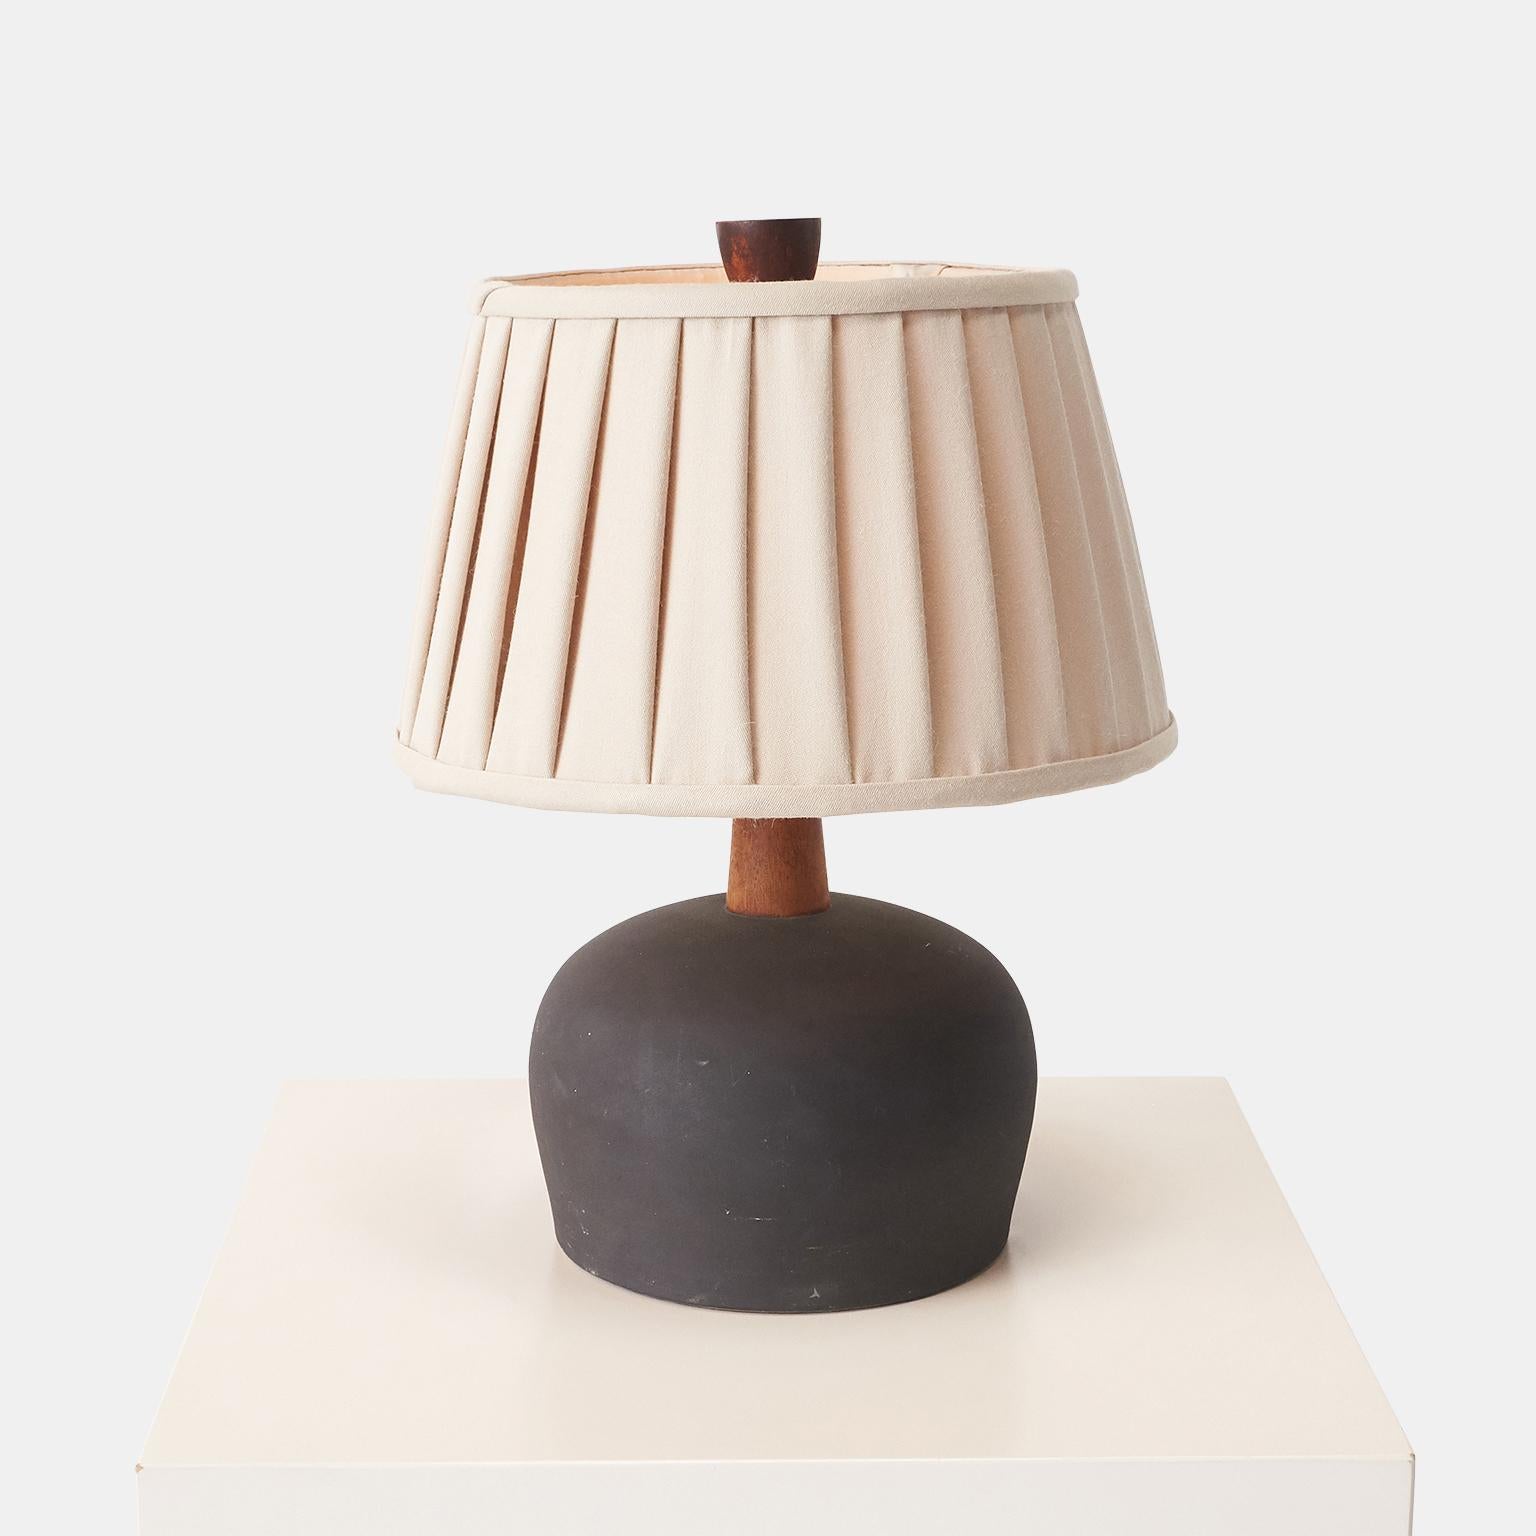 A matte black table lamp by Jane and Gordon Martz for Marshall Studios. Stoneware base with teak neck and finial.

Complete with a beautiful hand-crafted pleated shade made from a luxurious Sandra Jordan Prima Alpaca quinoa colored fabric from the